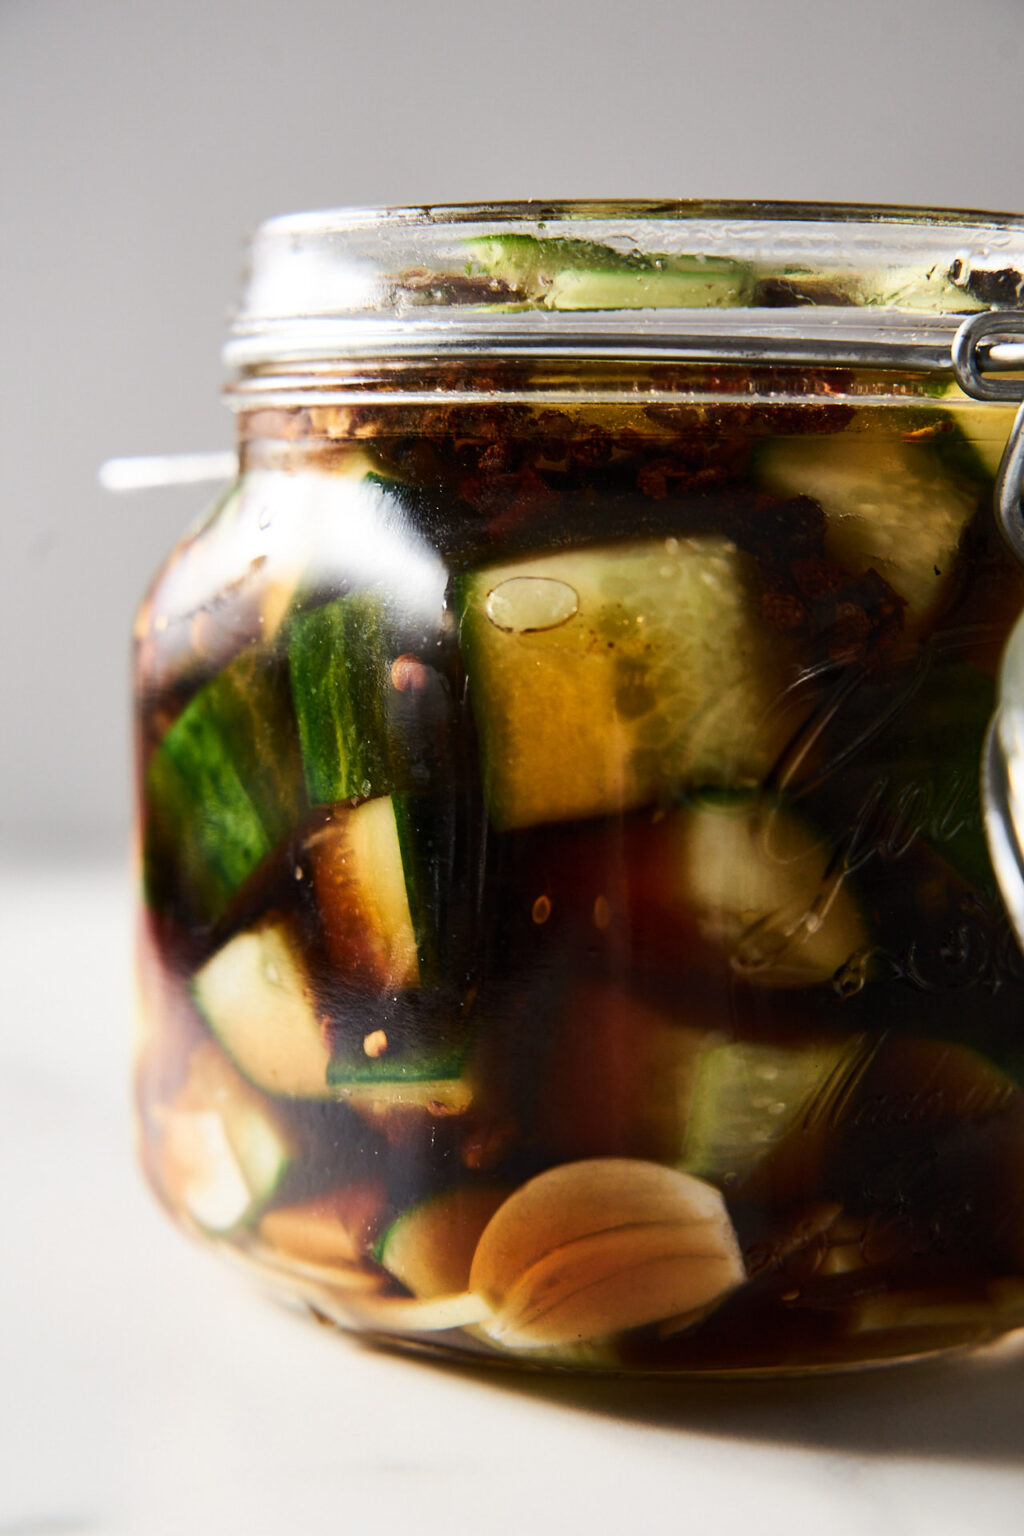 Prepared Unbeaten Cucumbers or Pickles pickled with soy sauce, garlic and chili Chinese style